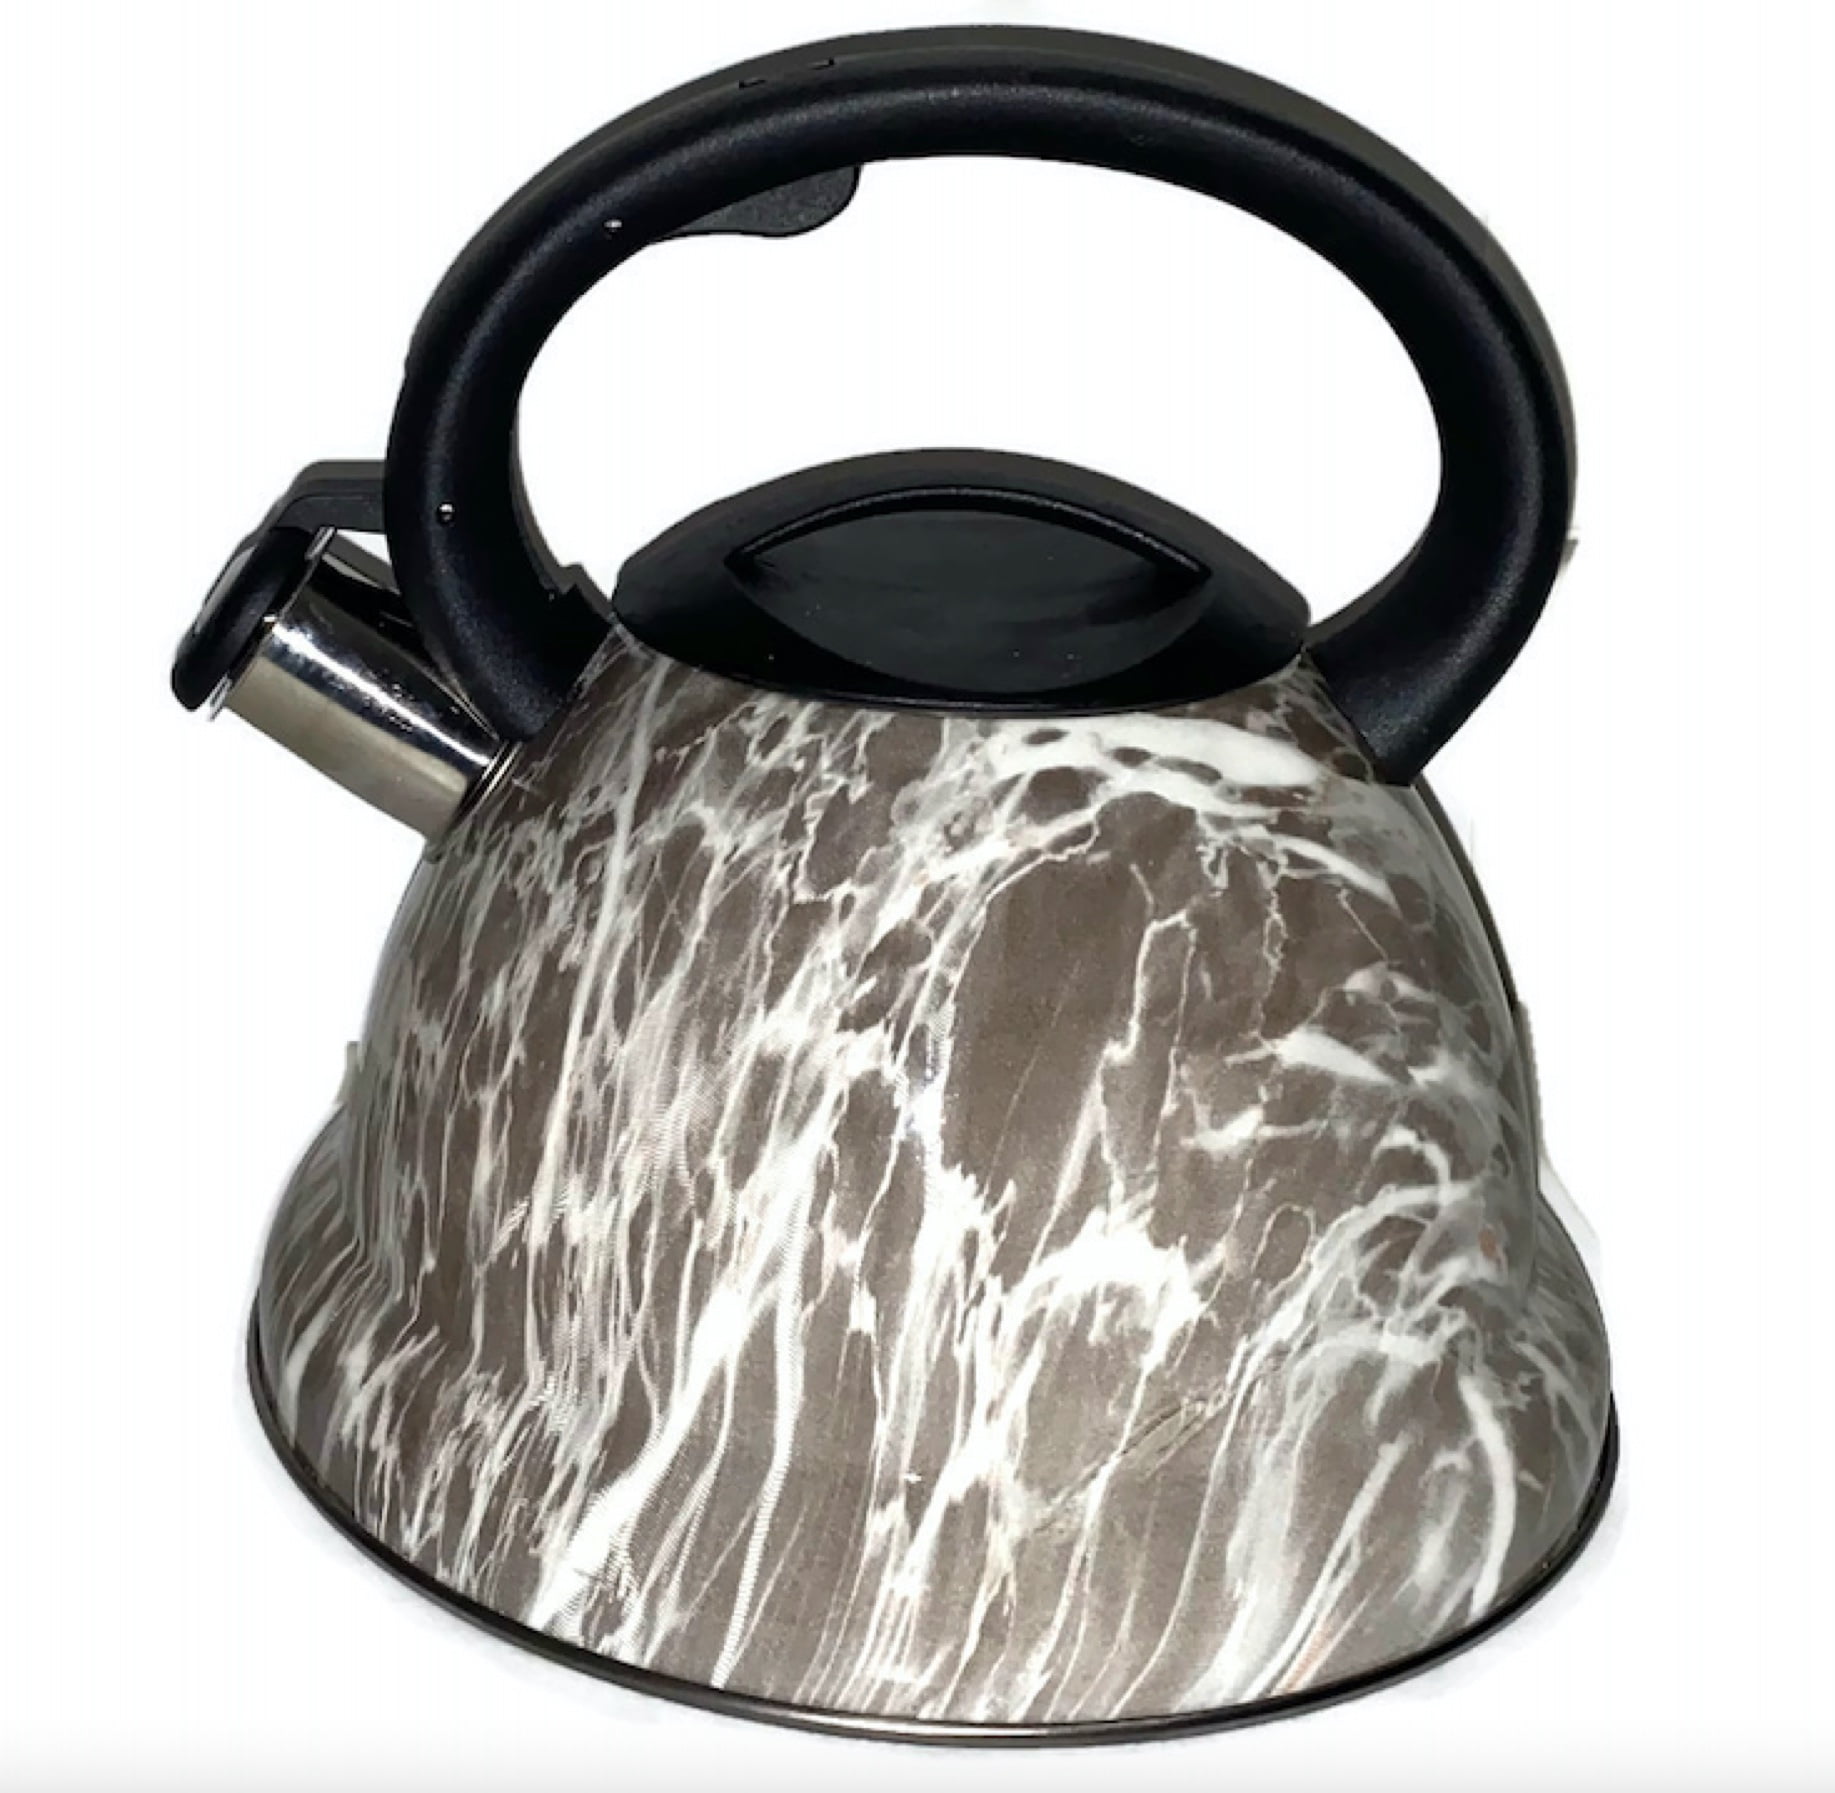 Modern Whistling Kettle 3.4 Qt. for Electric, Ceramic, Induction ...